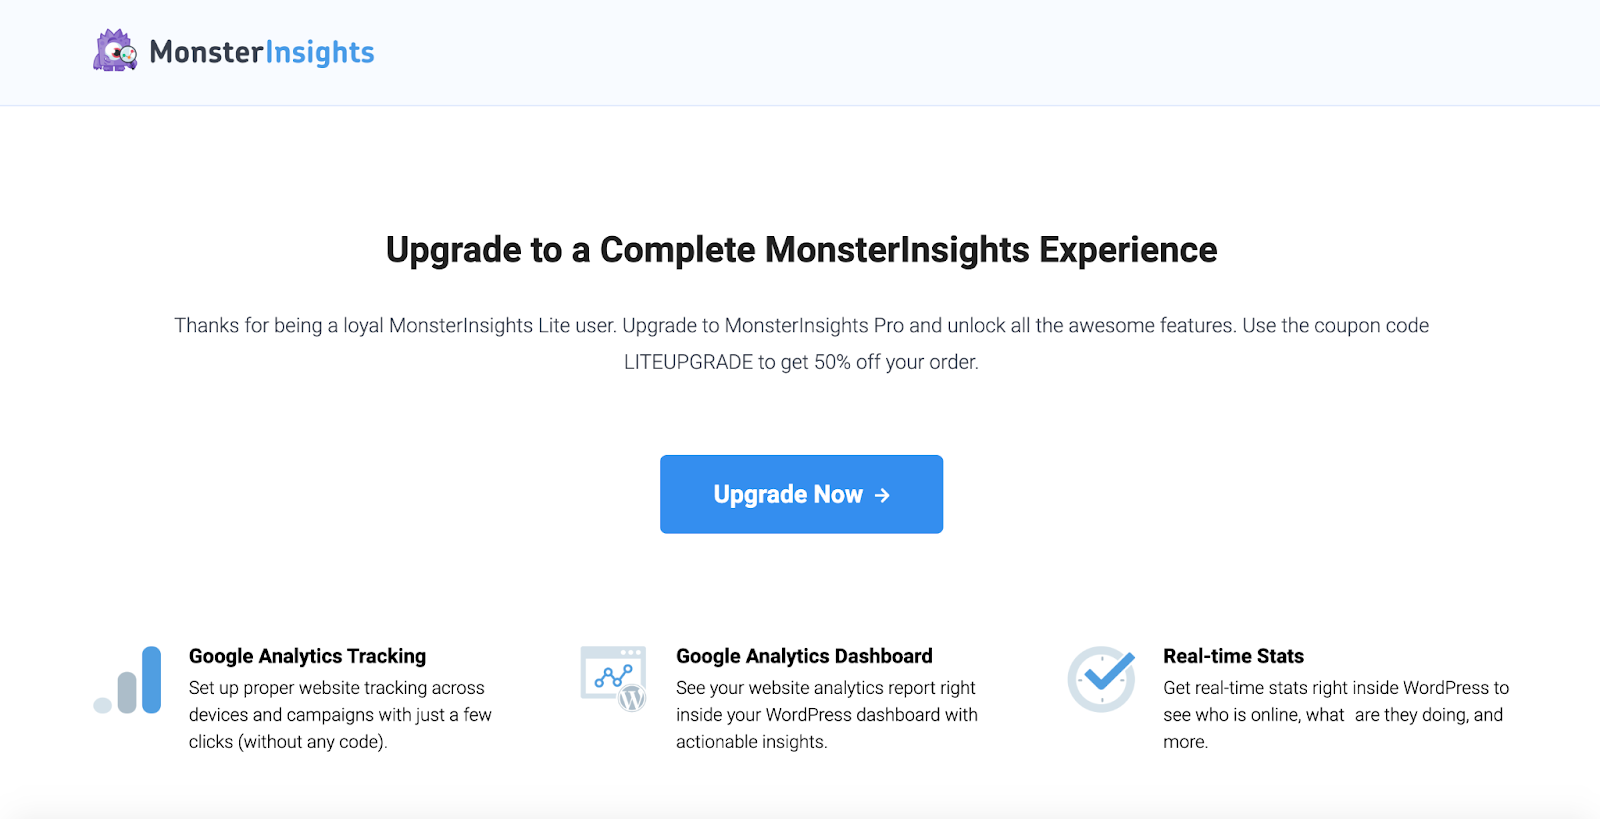 A screenshot of the MonsterInsights homepage featuring the “Upgrade Now” button and a list of product features